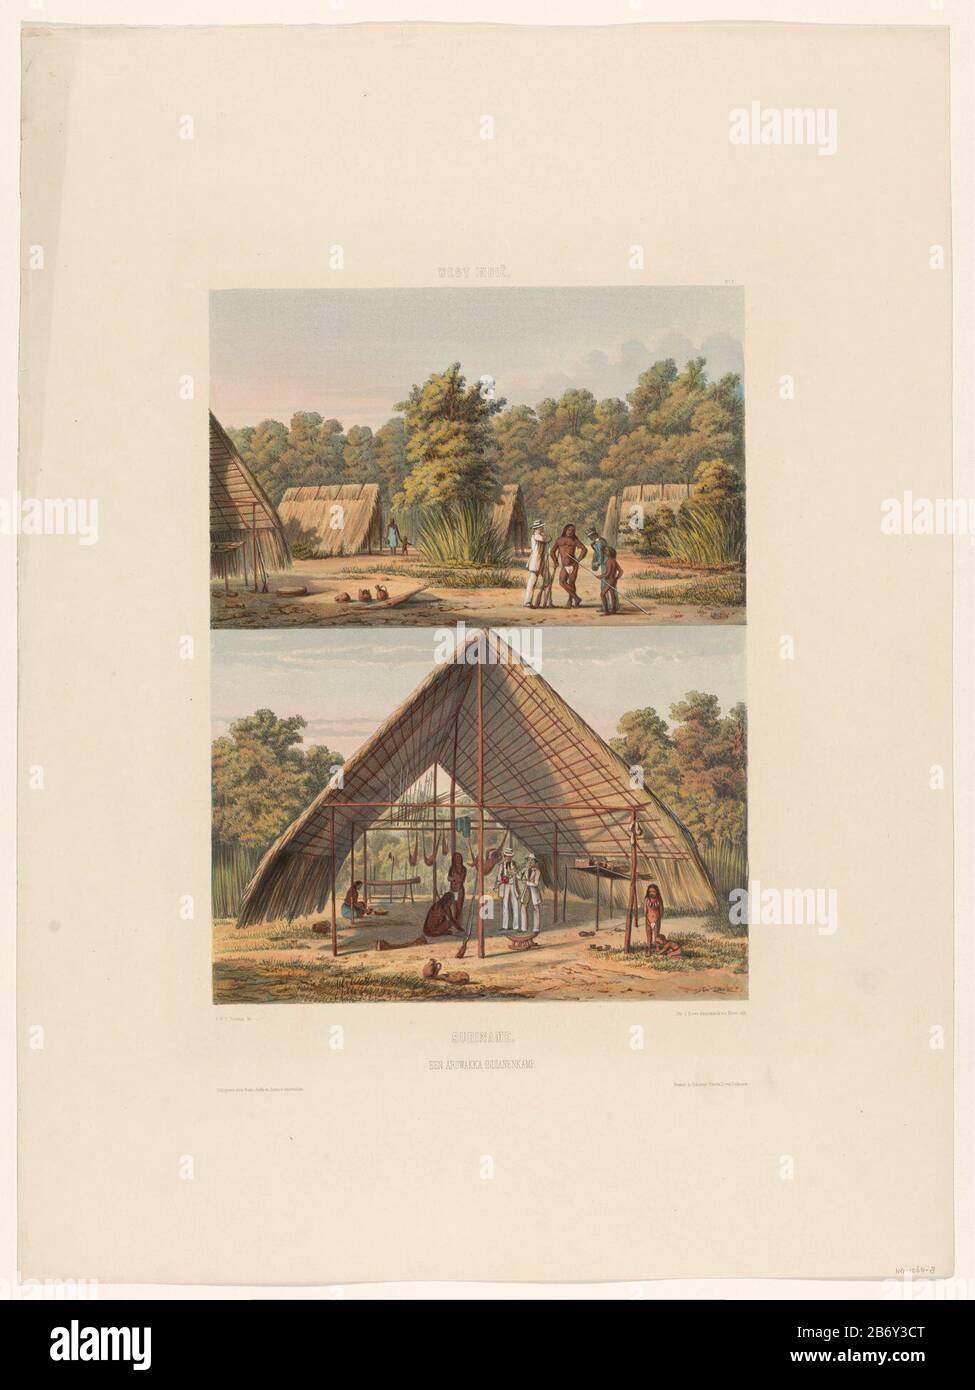 Kamp van Arowakken Suriname Een Arowakka indianenkamp (titel op object) Two faces on a camp of the Surinamese Amerindian Arawaks. Part of the bodywork 'visions of Holland's West Indien'. Manufacturer : printmaker: Esquire Jacob Eduard van Heemskerck van Beest (listed property) to drawing: Gerard Voorduin (listed building) printer: Steendrukkerij Industry (listed building) editor: Frans Buffa en Zonen (listed property) Place manufacture: printmaker: Netherlands Publisher: Utrecht Publisher: Amsterdam Date: 1860 - 1862 Physical characteristics: color lithograph, hand-colored and painted material Stock Photo